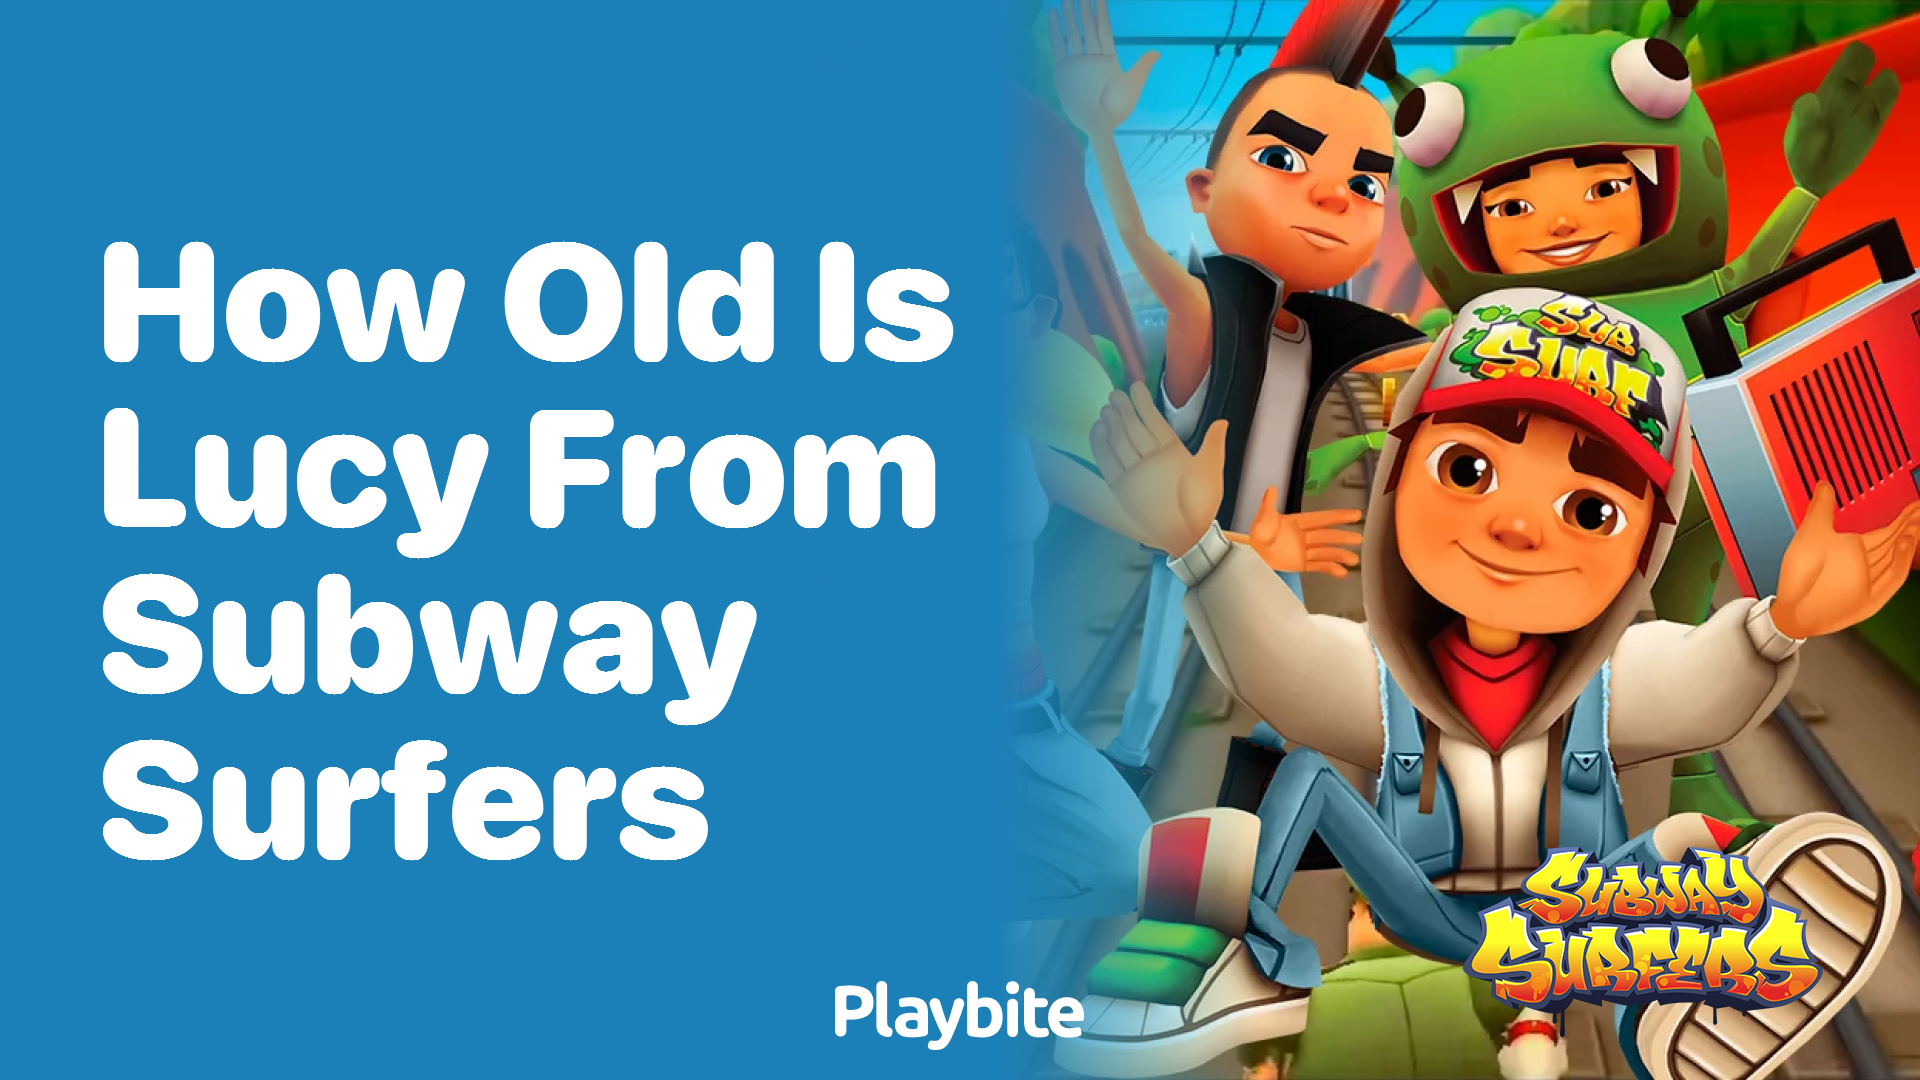 How old is Lucy from Subway Surfers?